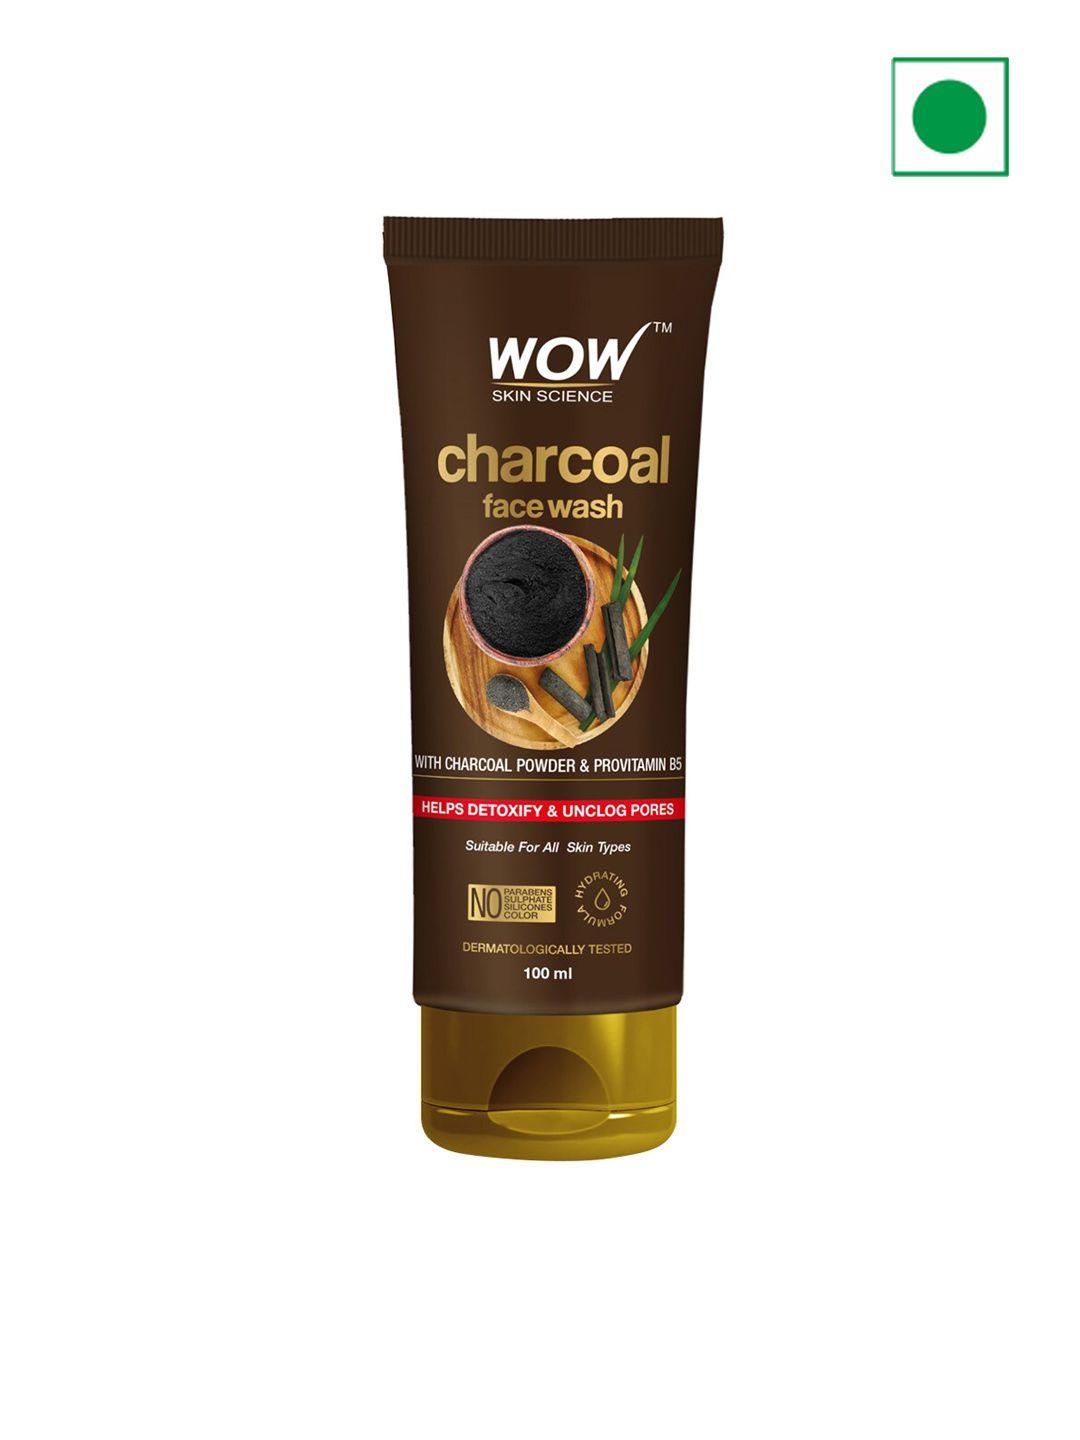 wow skin science charcoal face wash - 100ml